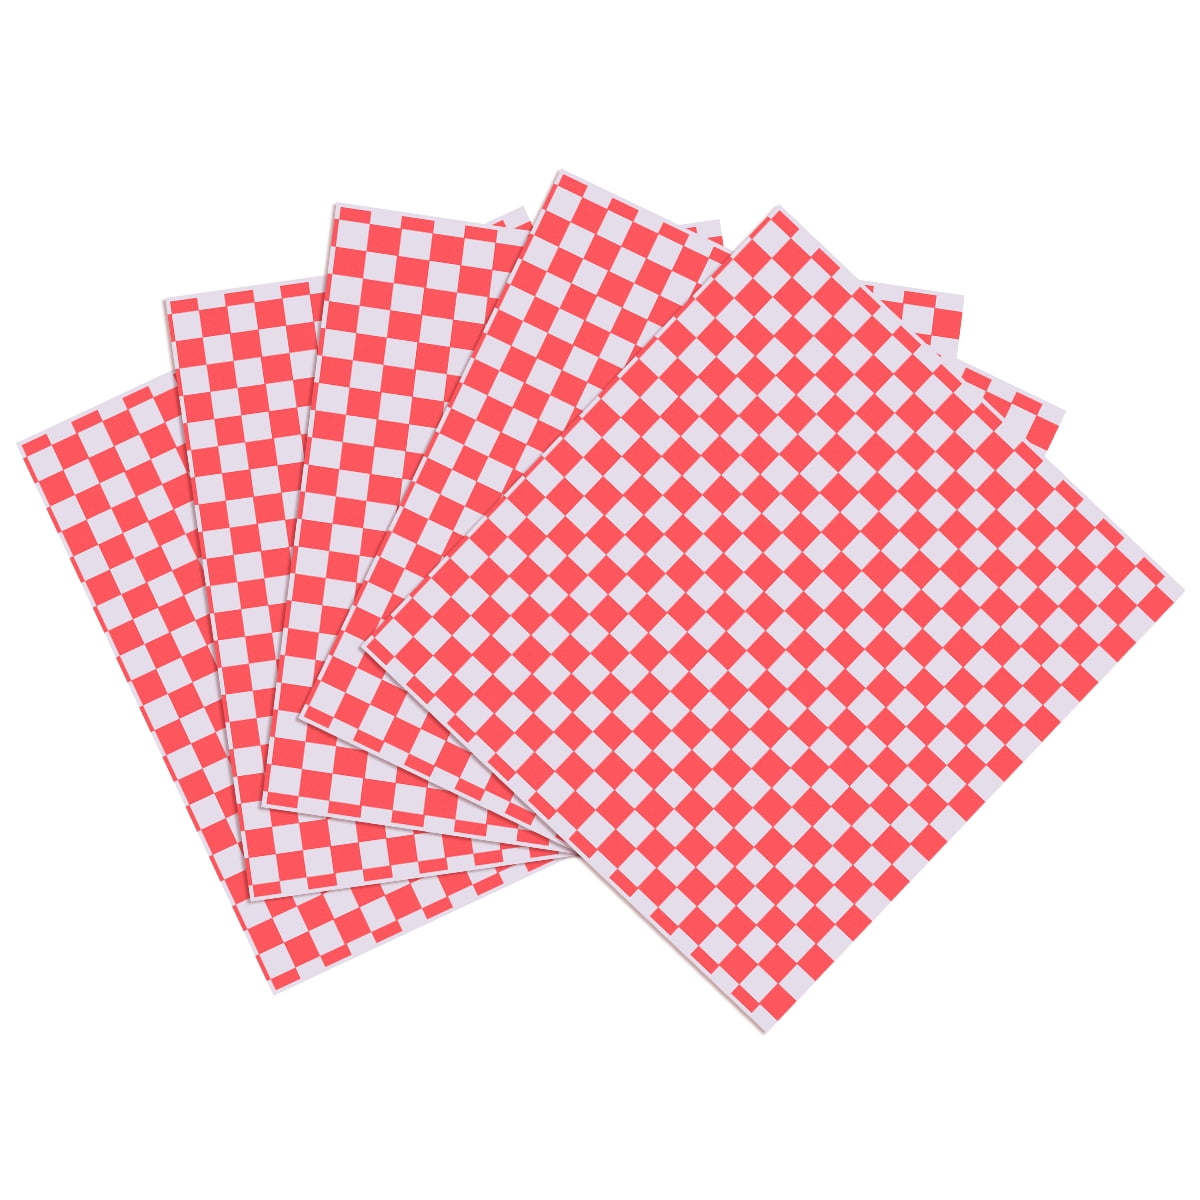 50 Red Patty Paper Liners by Avant Grub 50 Heavy-Duty Paper Food Baskets & 